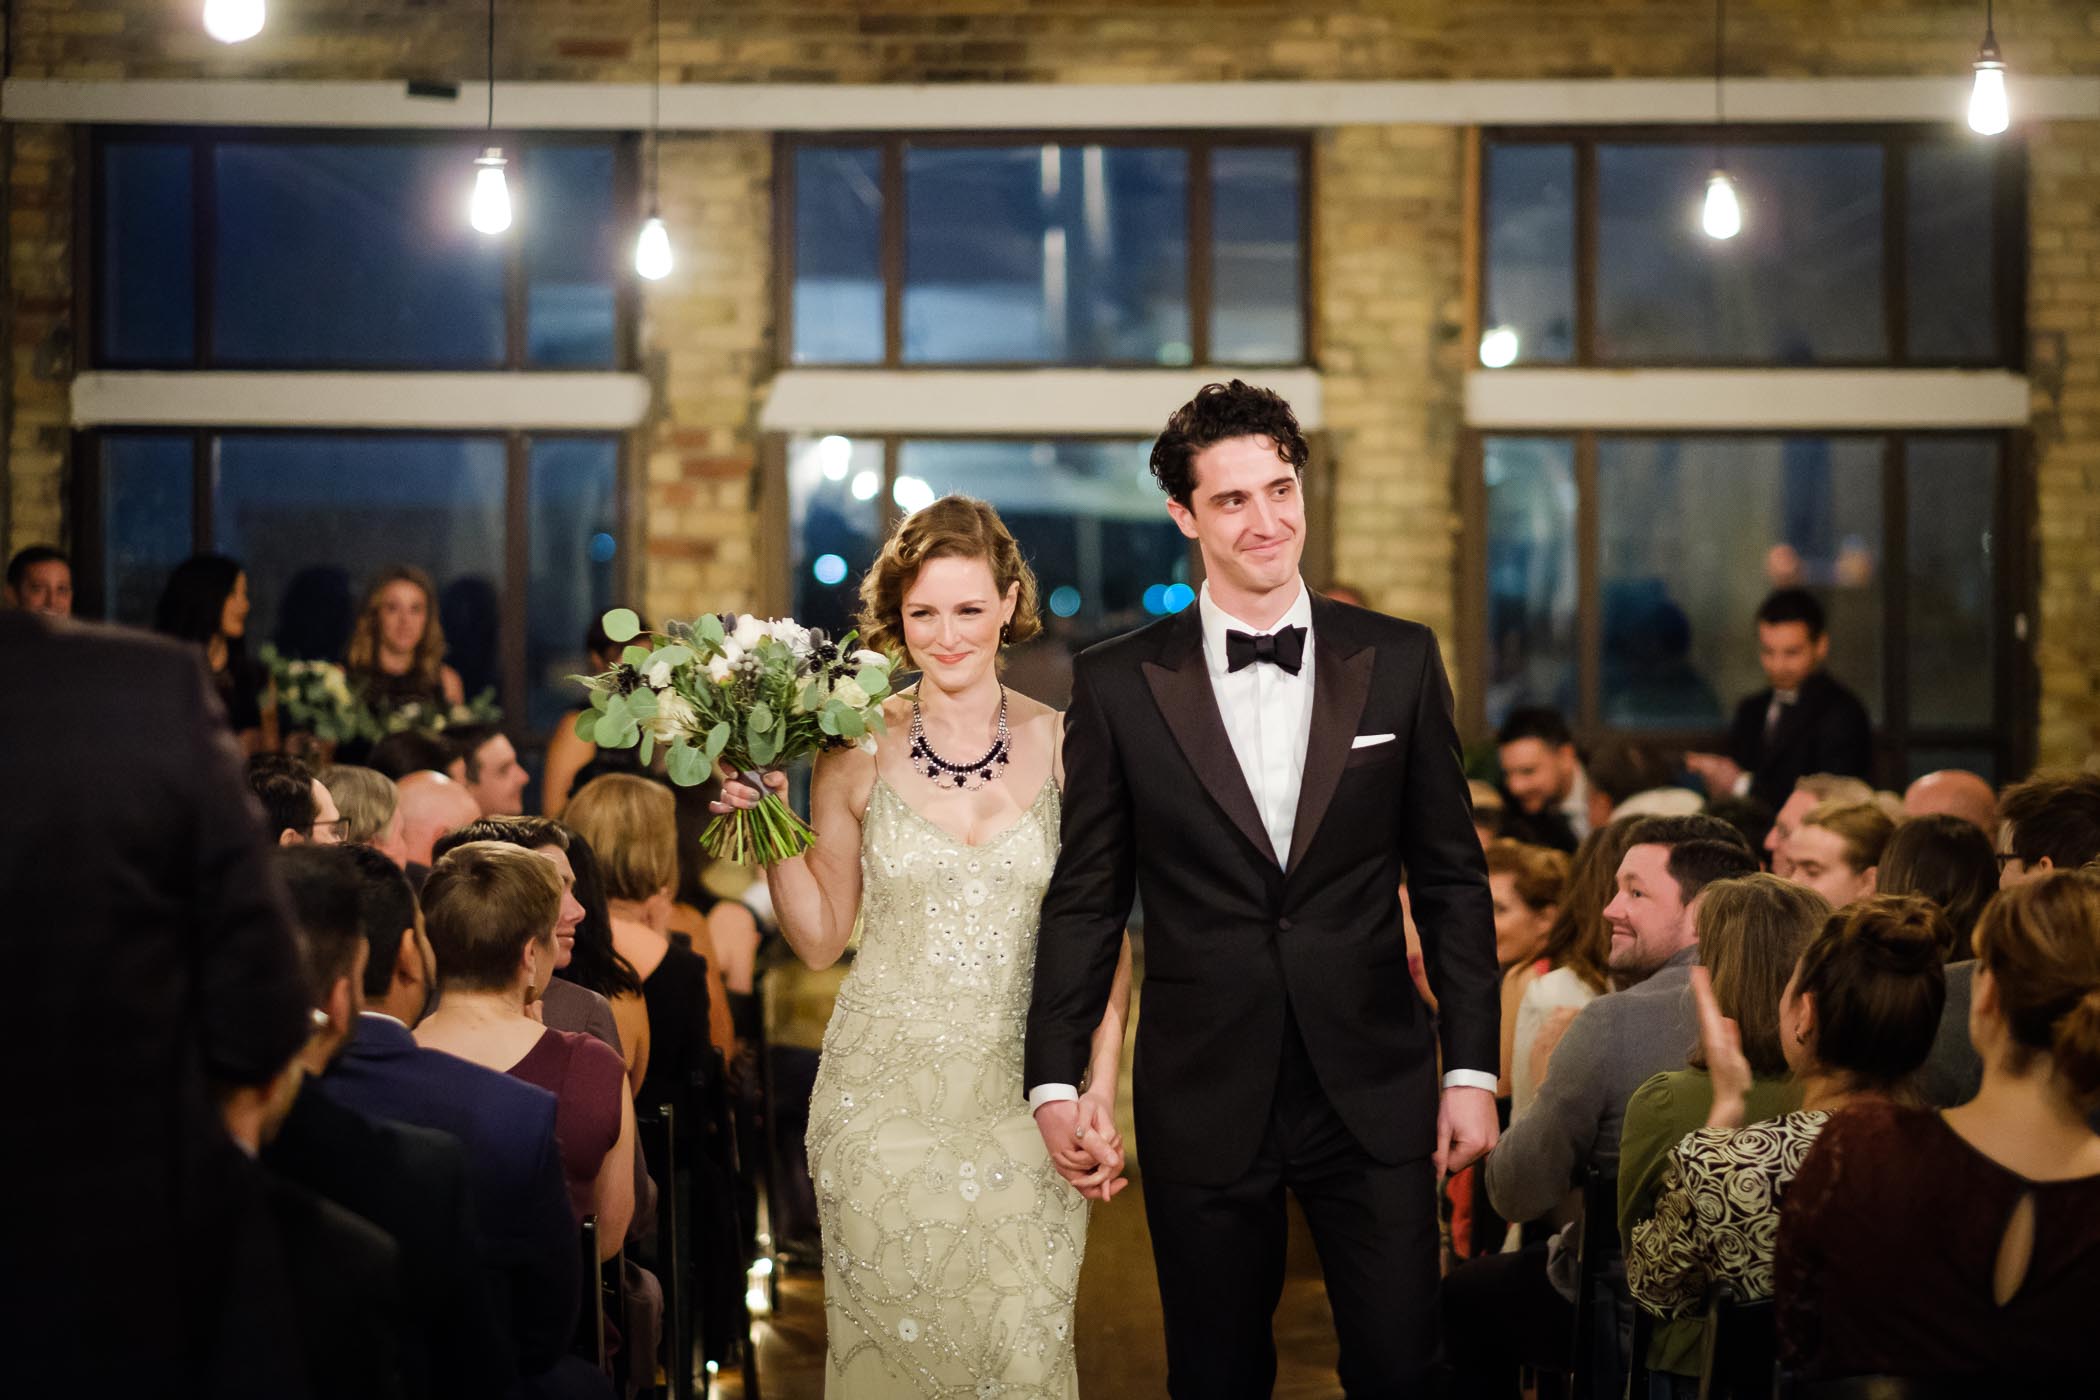 After getting married, the bride and groom walk down aisle at The Burroughes Building.